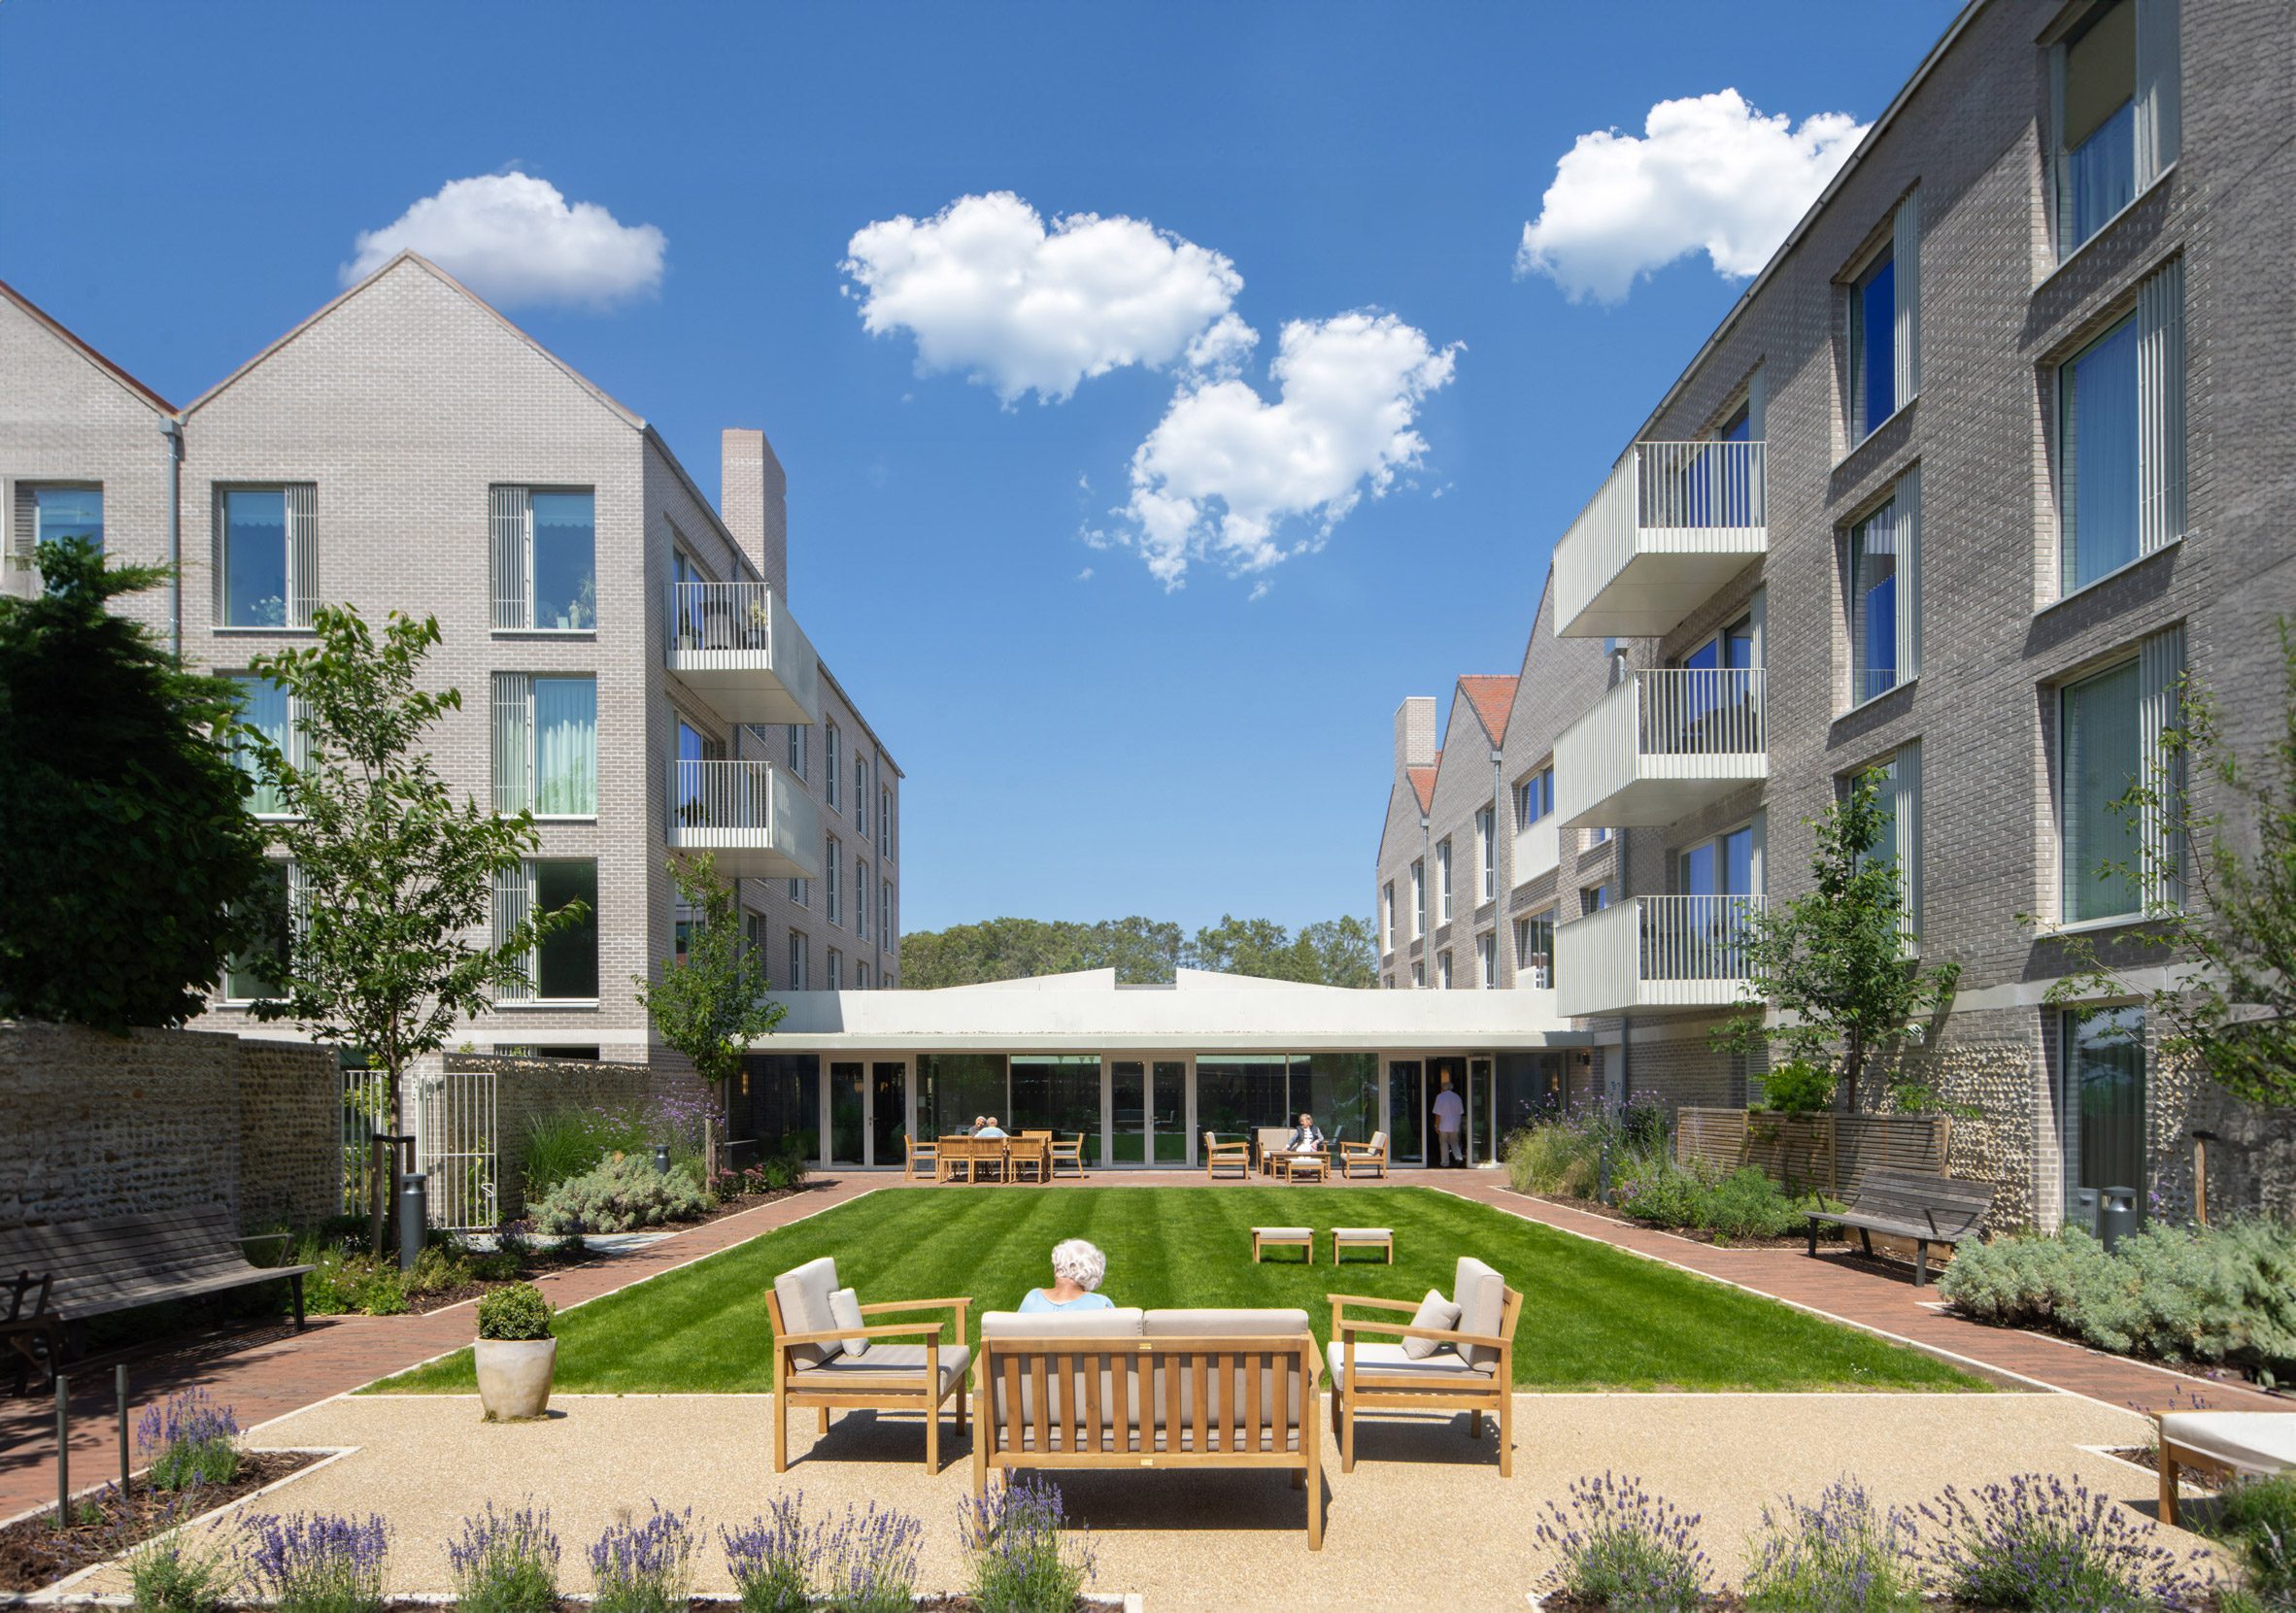 Central garden at Cobham Bowers retirement housing in Surrey by Coffey Architects